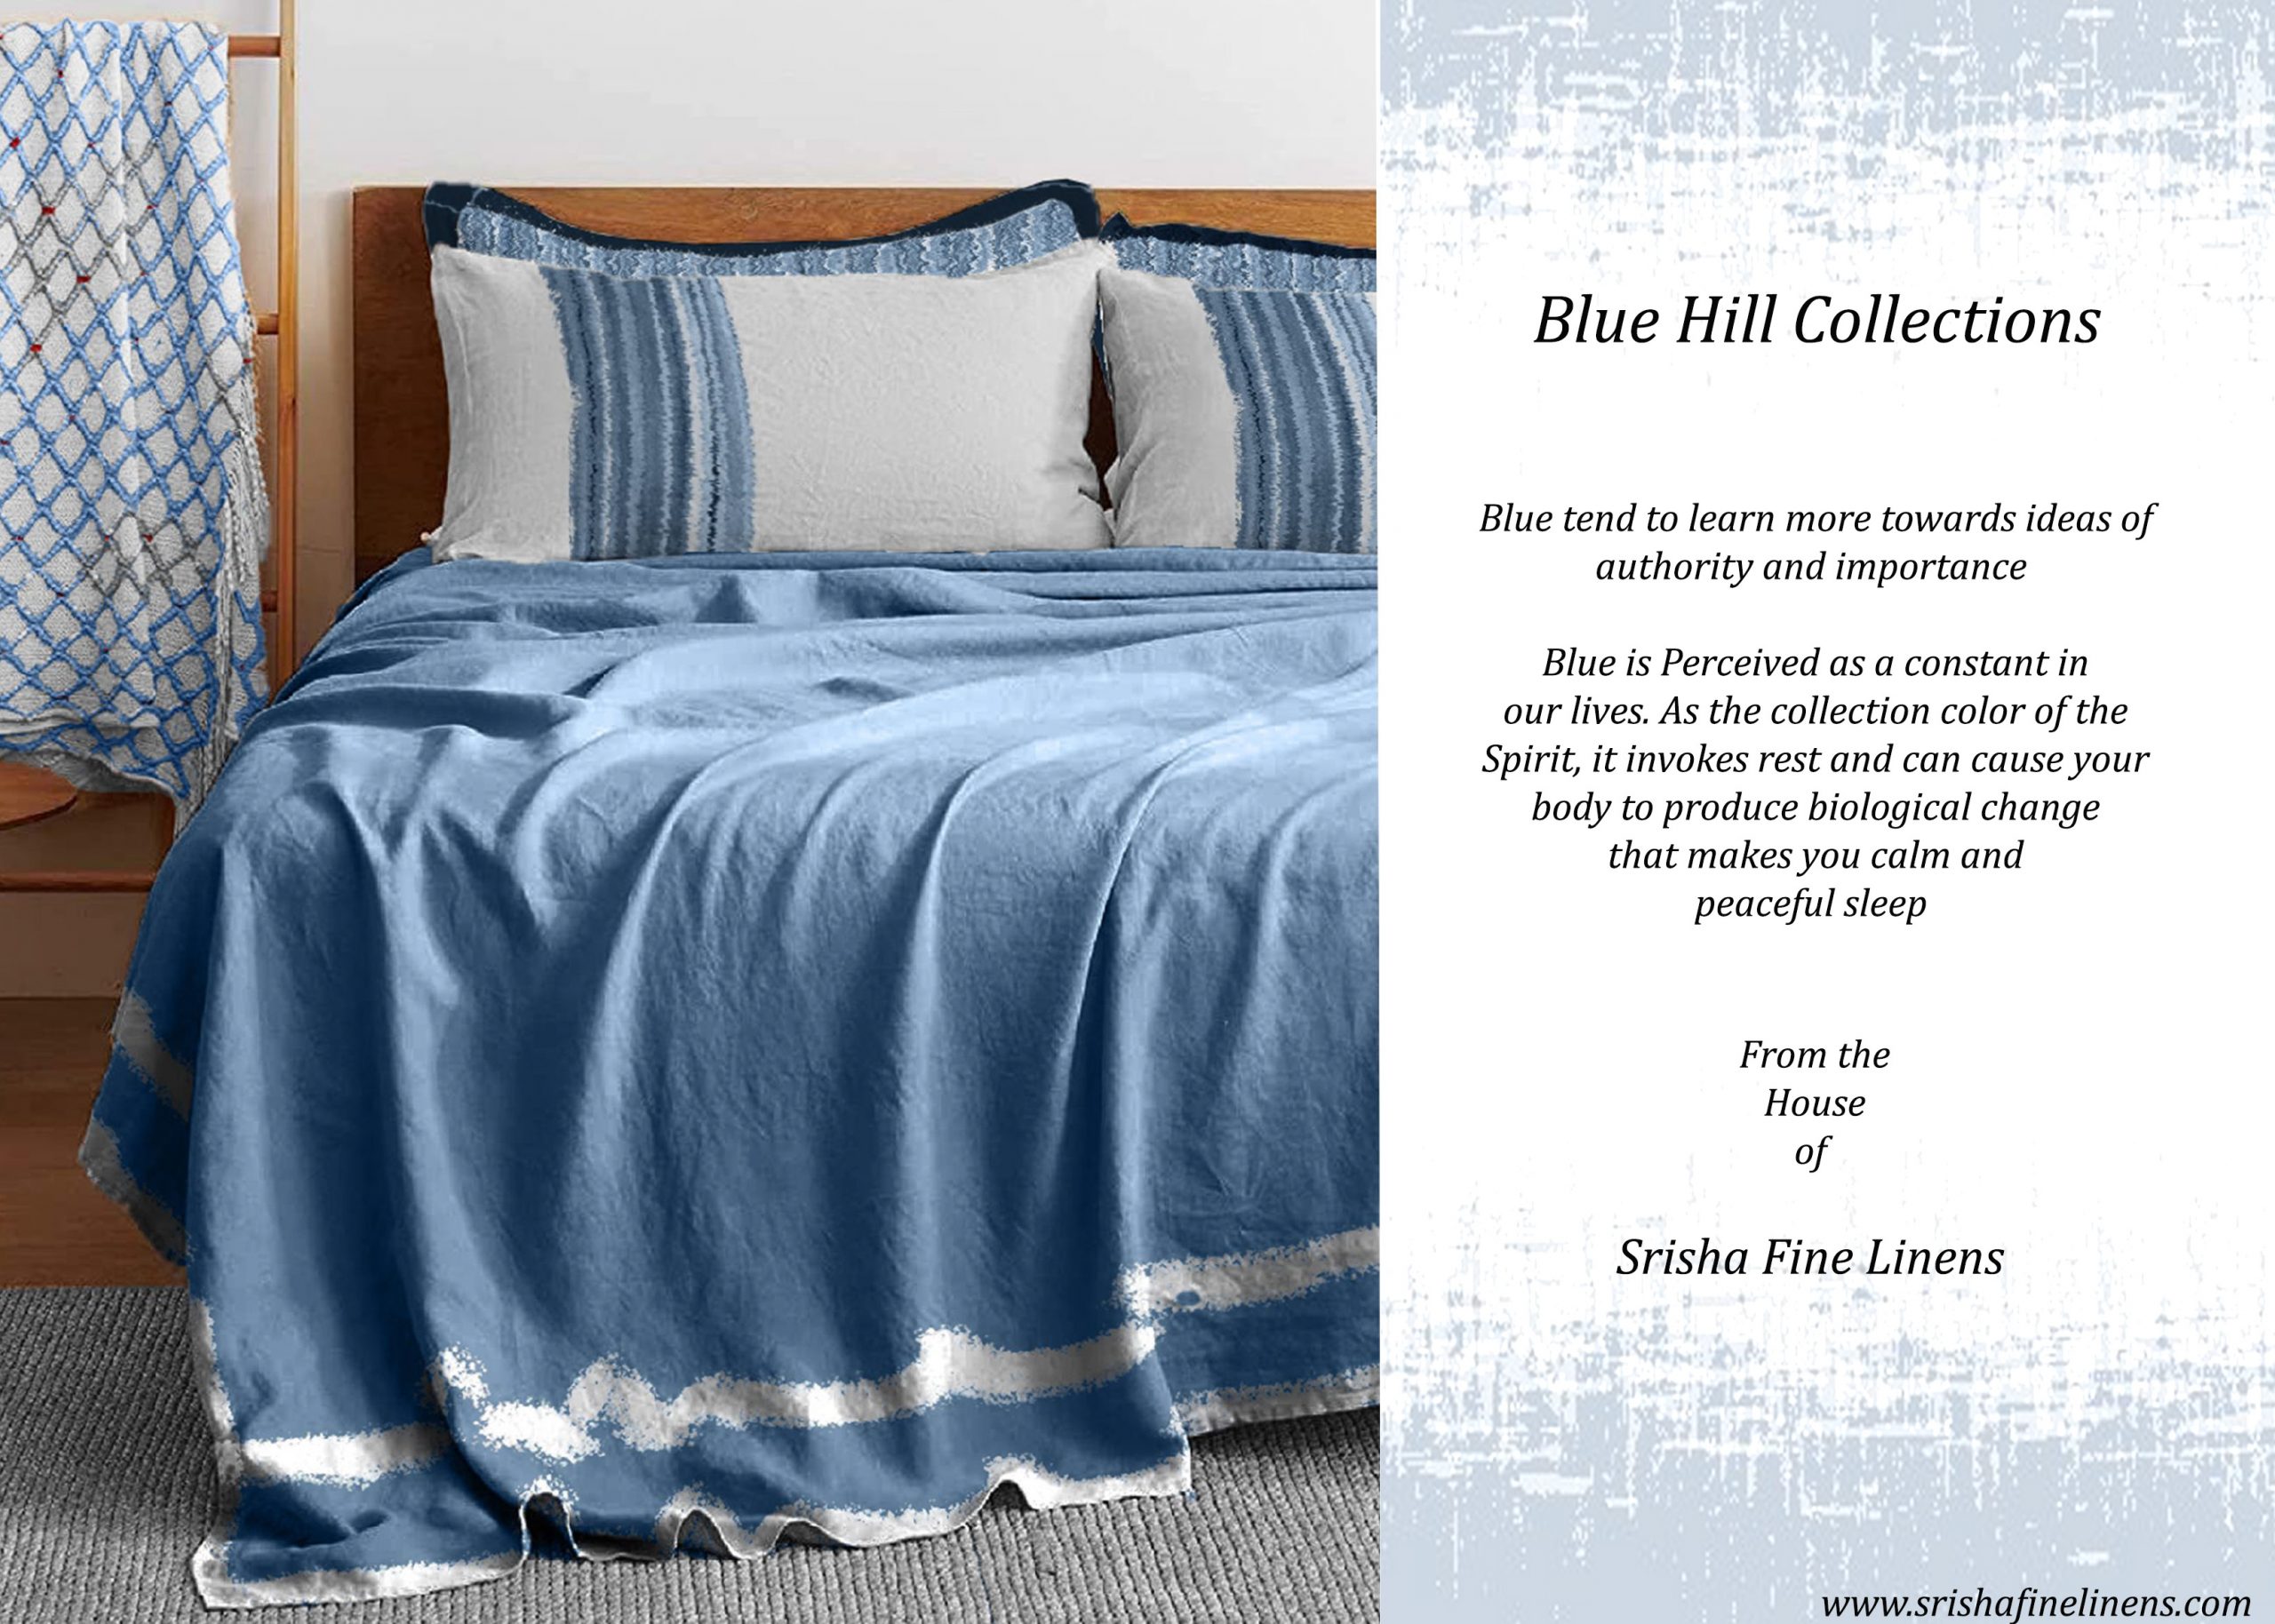 Blue Hill collections